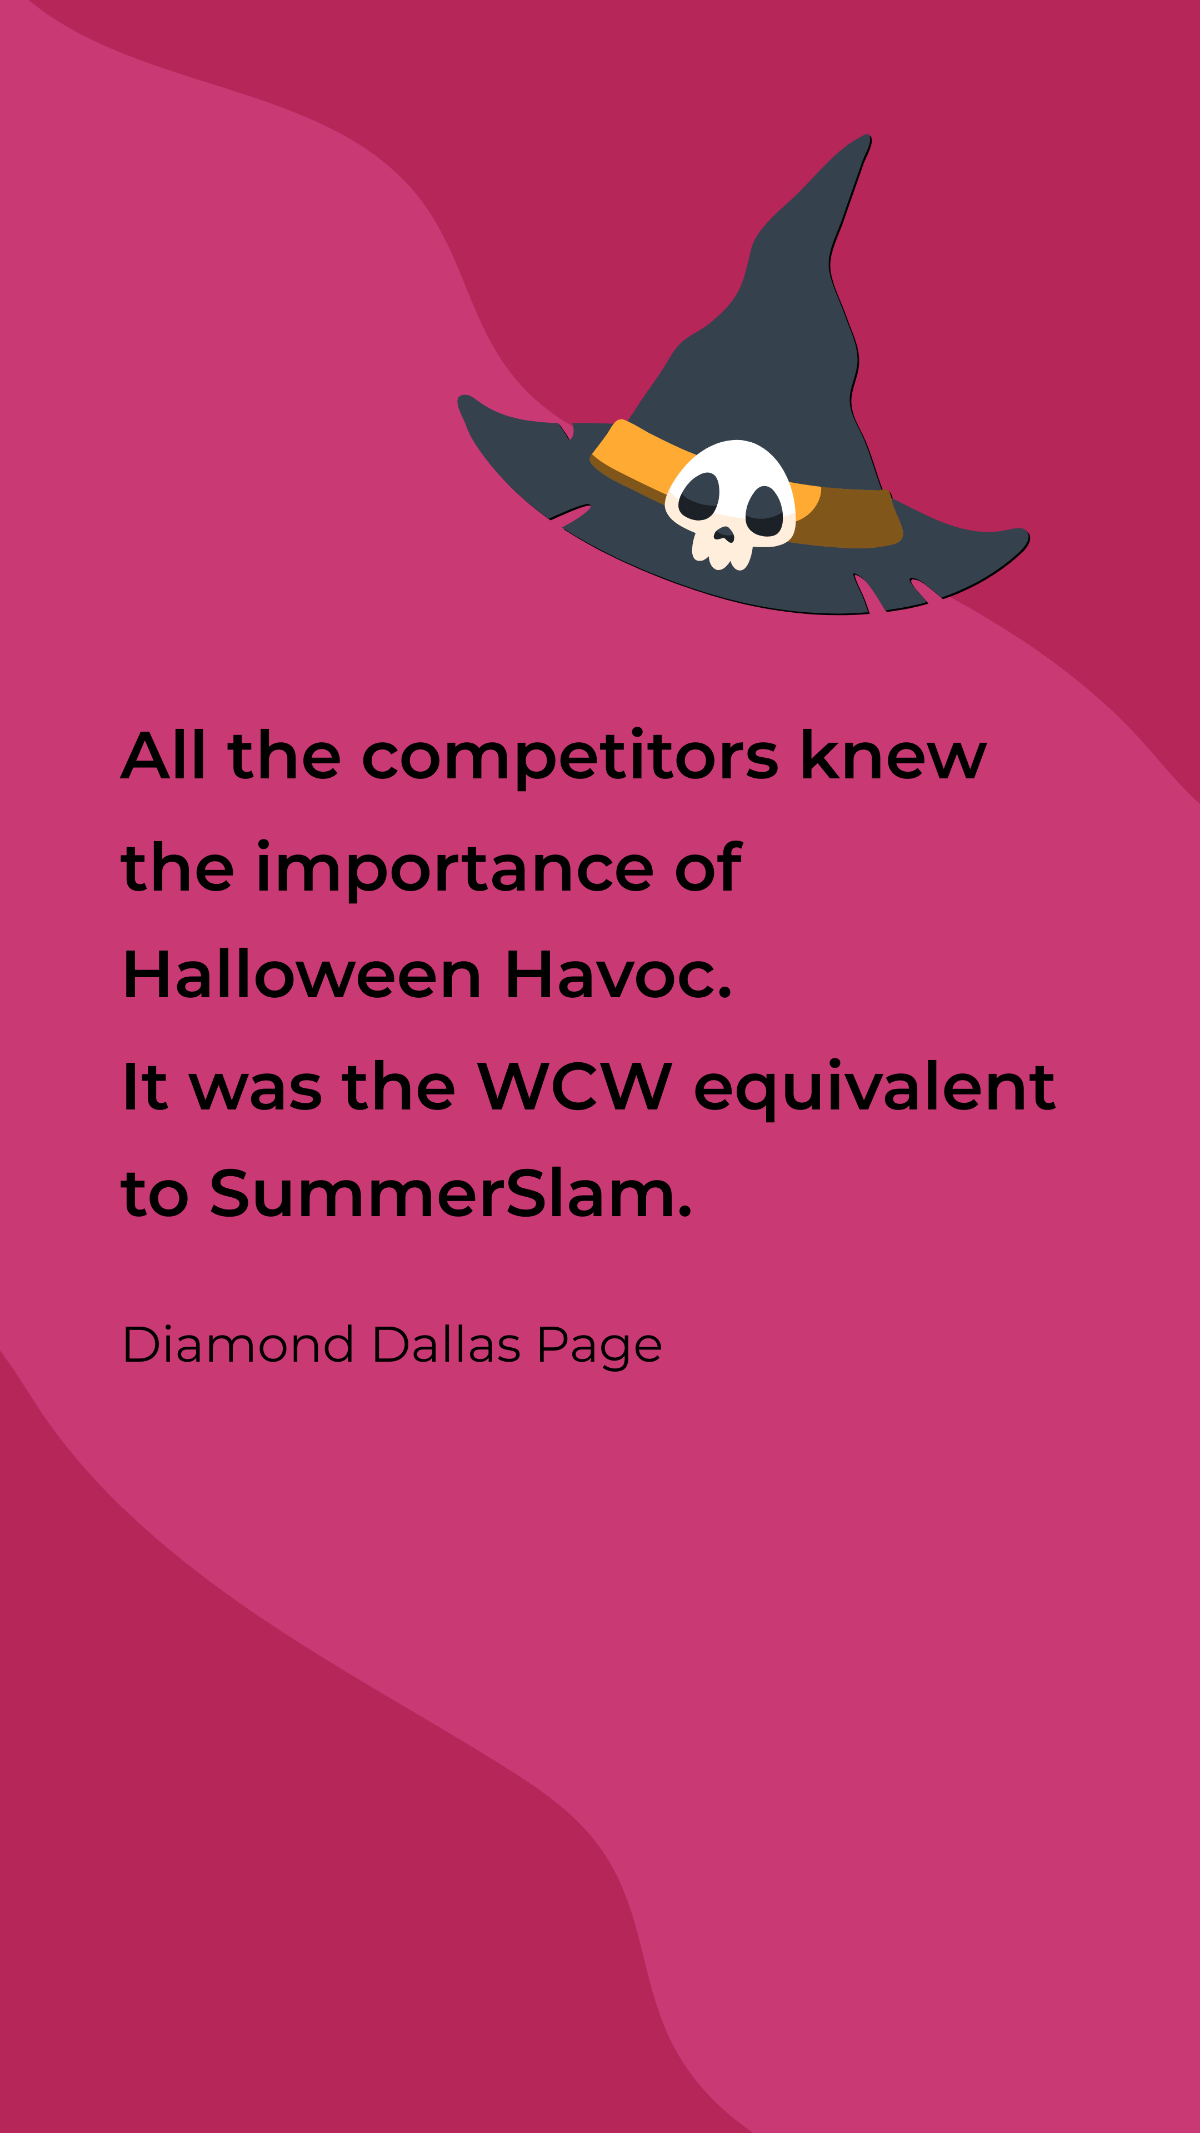 Diamond Dallas Page- All the competitors knew the importance of Halloween Havoc. It was the WCW equivalent to SummerSlam. Template